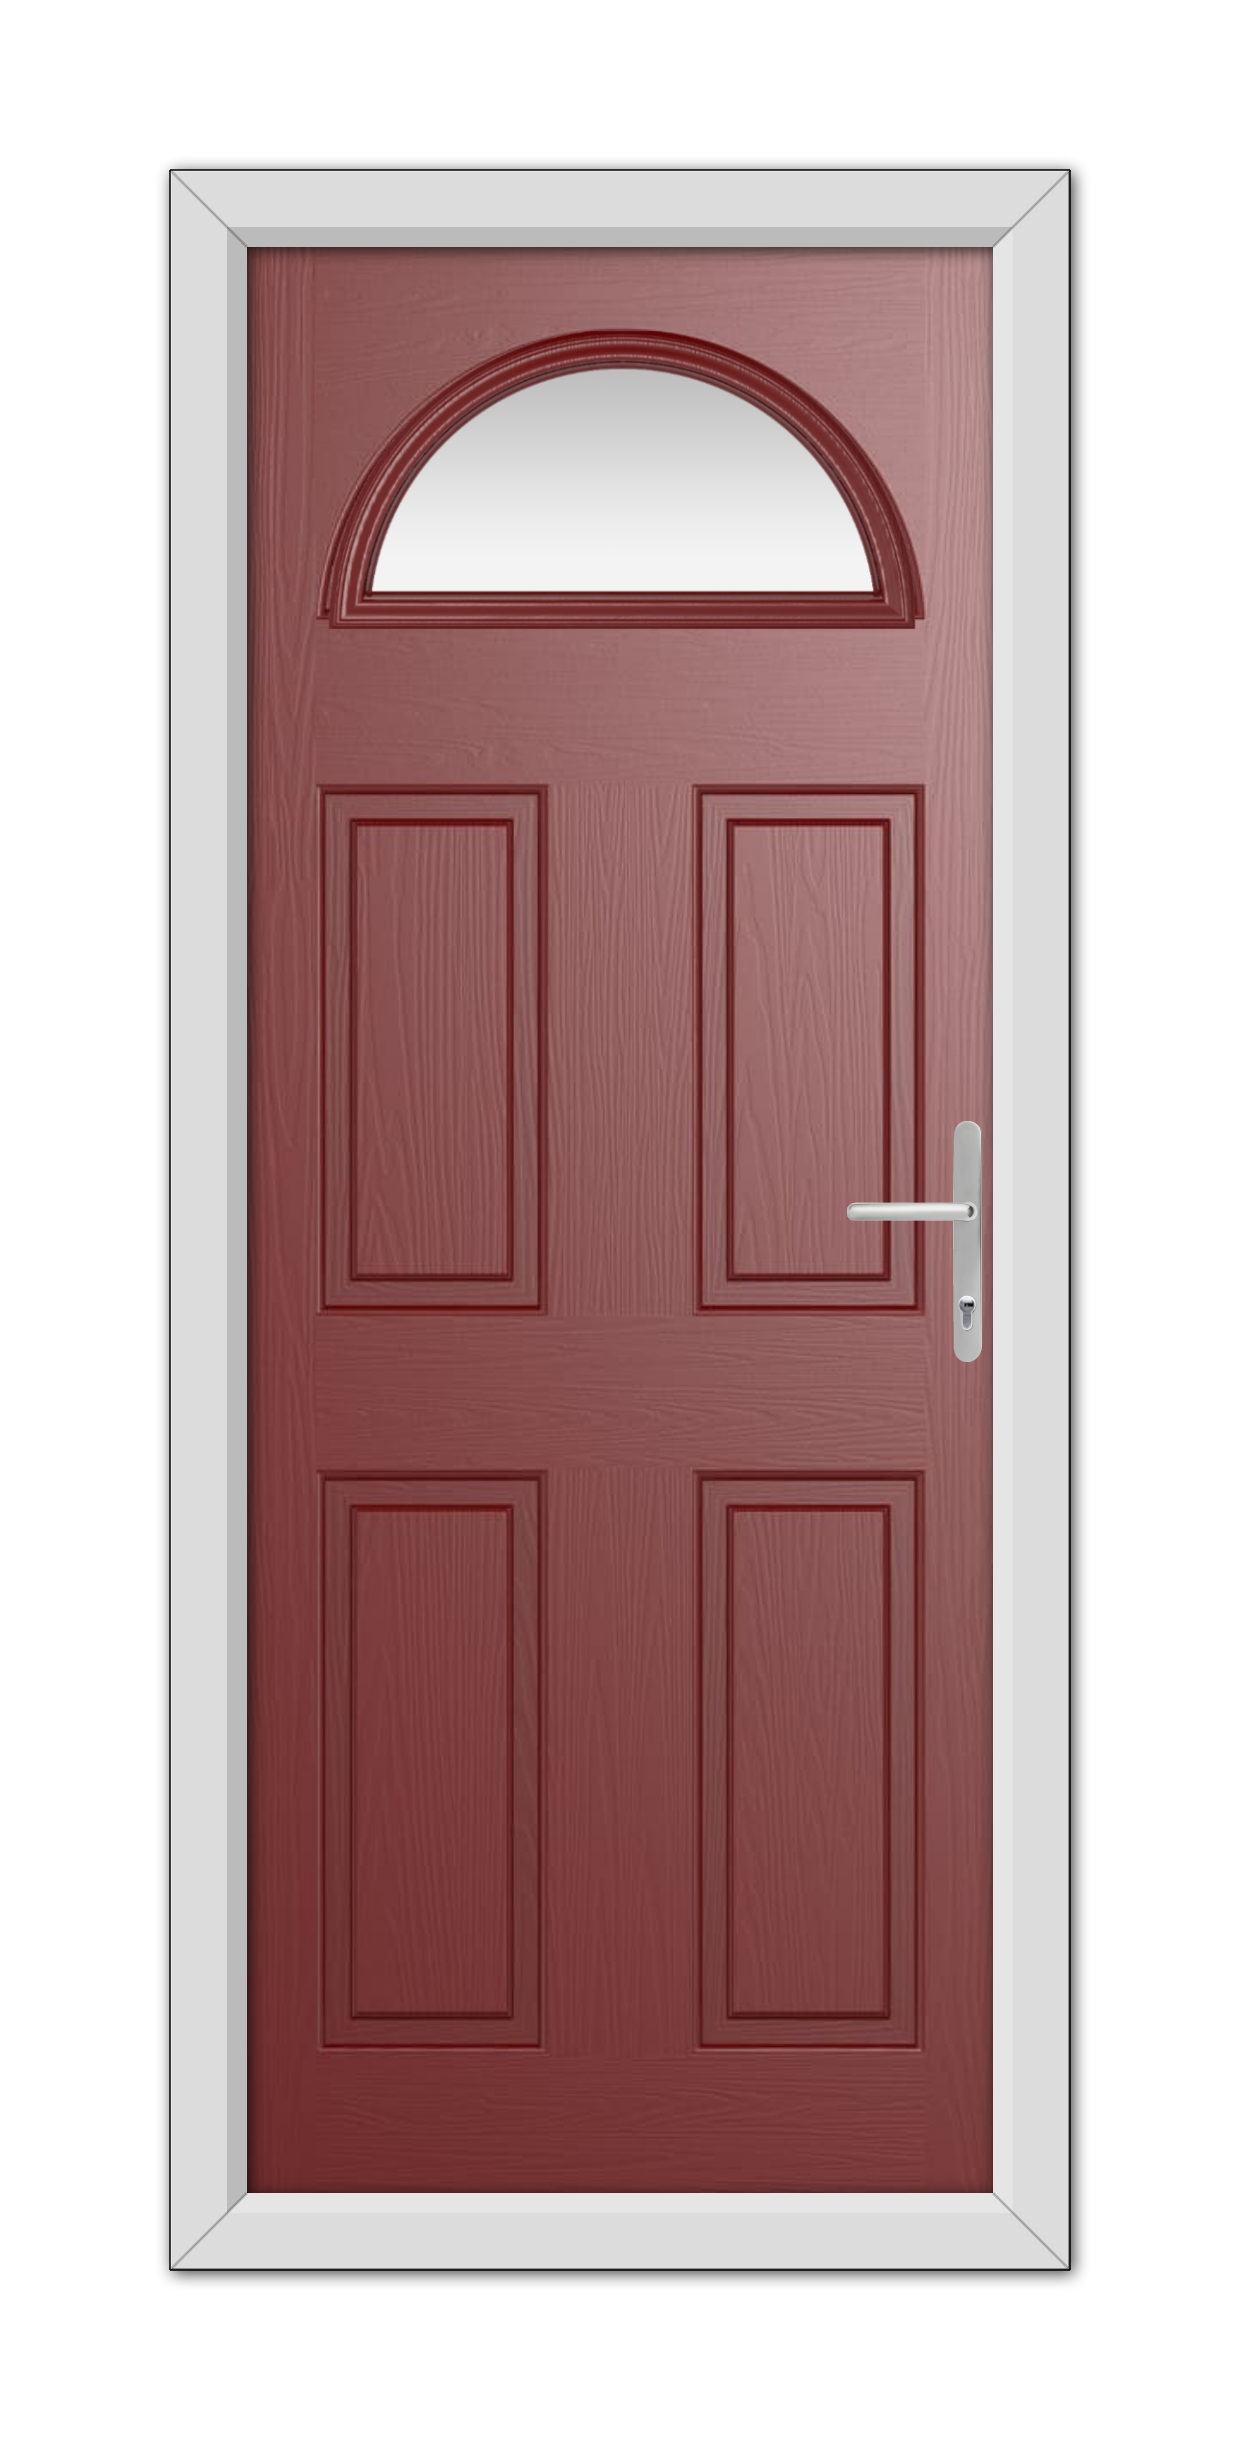 A Red Winslow 1 Composite Door 48mm Timber Core with six panels and a semi-circular window at the top, set in a white frame, featuring a silver handle on the right side.